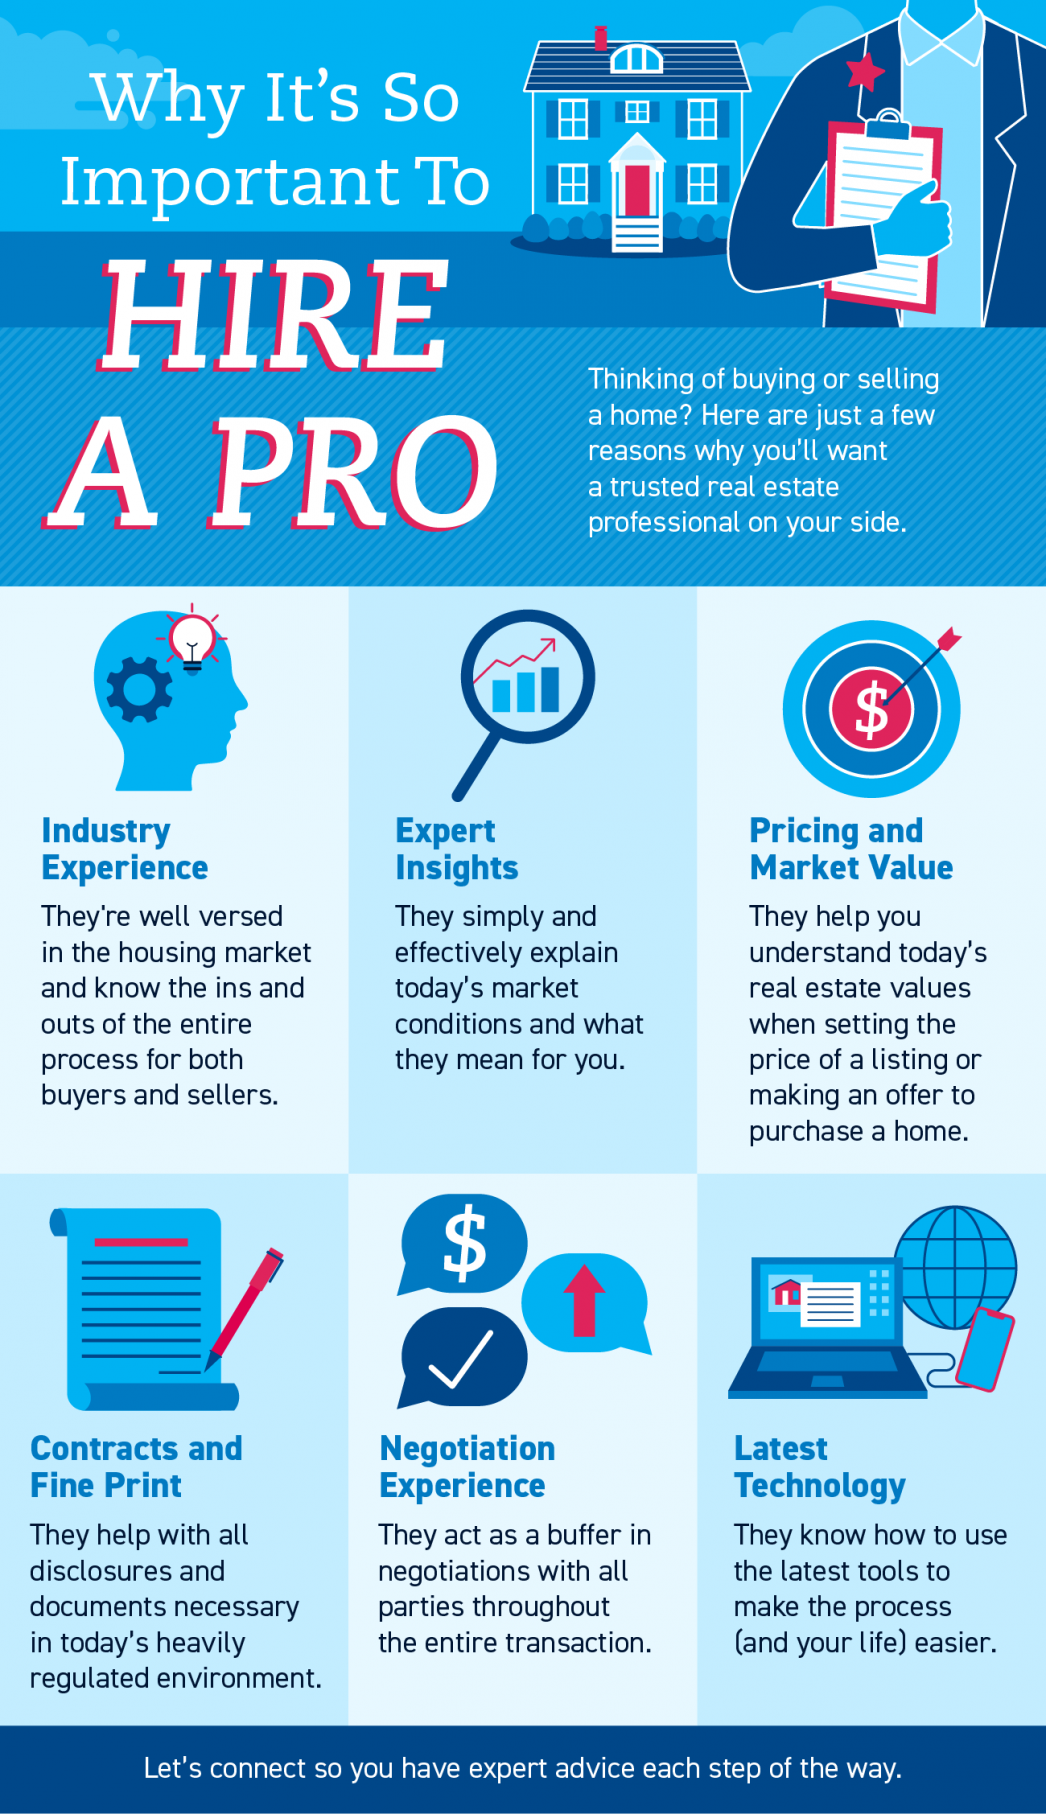 Why It’s So Important To Hire a Pro INFOGRAPHIC - KM Realty Group LLC Chicago